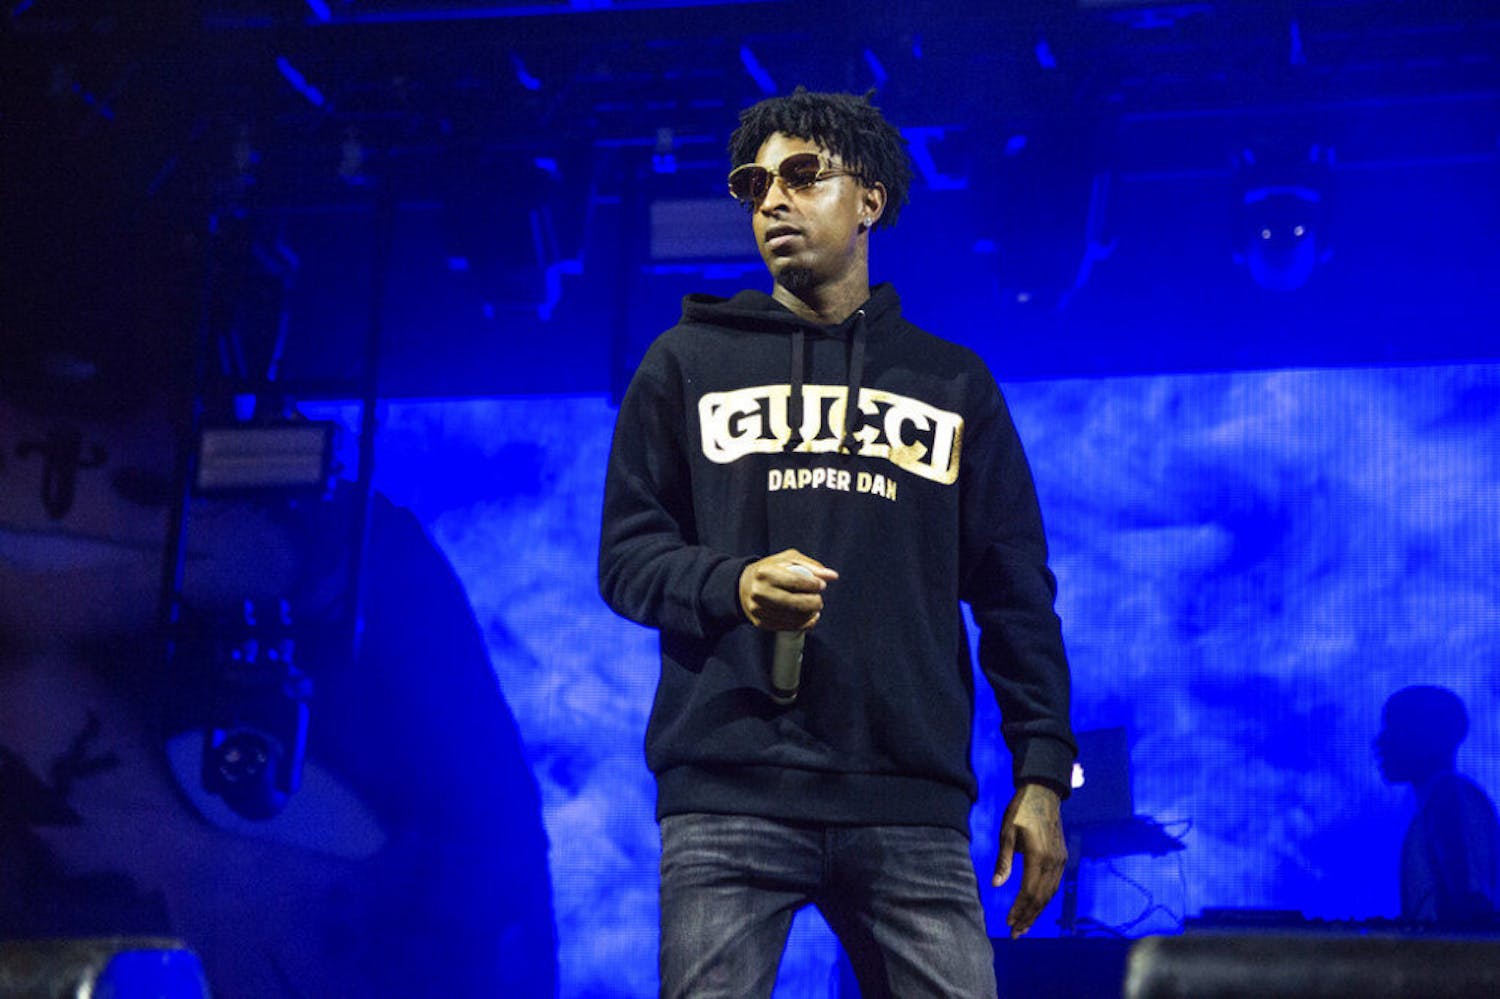 FILE - In this Sunday, Oct. 28, 2018, file photo, 21 Savage performs at the Voodoo Music Experience in City Park in New Orleans. Authorities in Atlanta say Grammy-nominated rapper 21 Savage is in federal immigration custody. U.S. Immigration and Customs Enforcement spokesman Bryan Cox says the artist, whose given name is Sha Yaa Bin Abraham-Joseph, was arrested in a targeted operation early Sunday, Feb. 3, 2019, in the Atlanta area. (Photo by Amy Harris/Invision/AP, File)